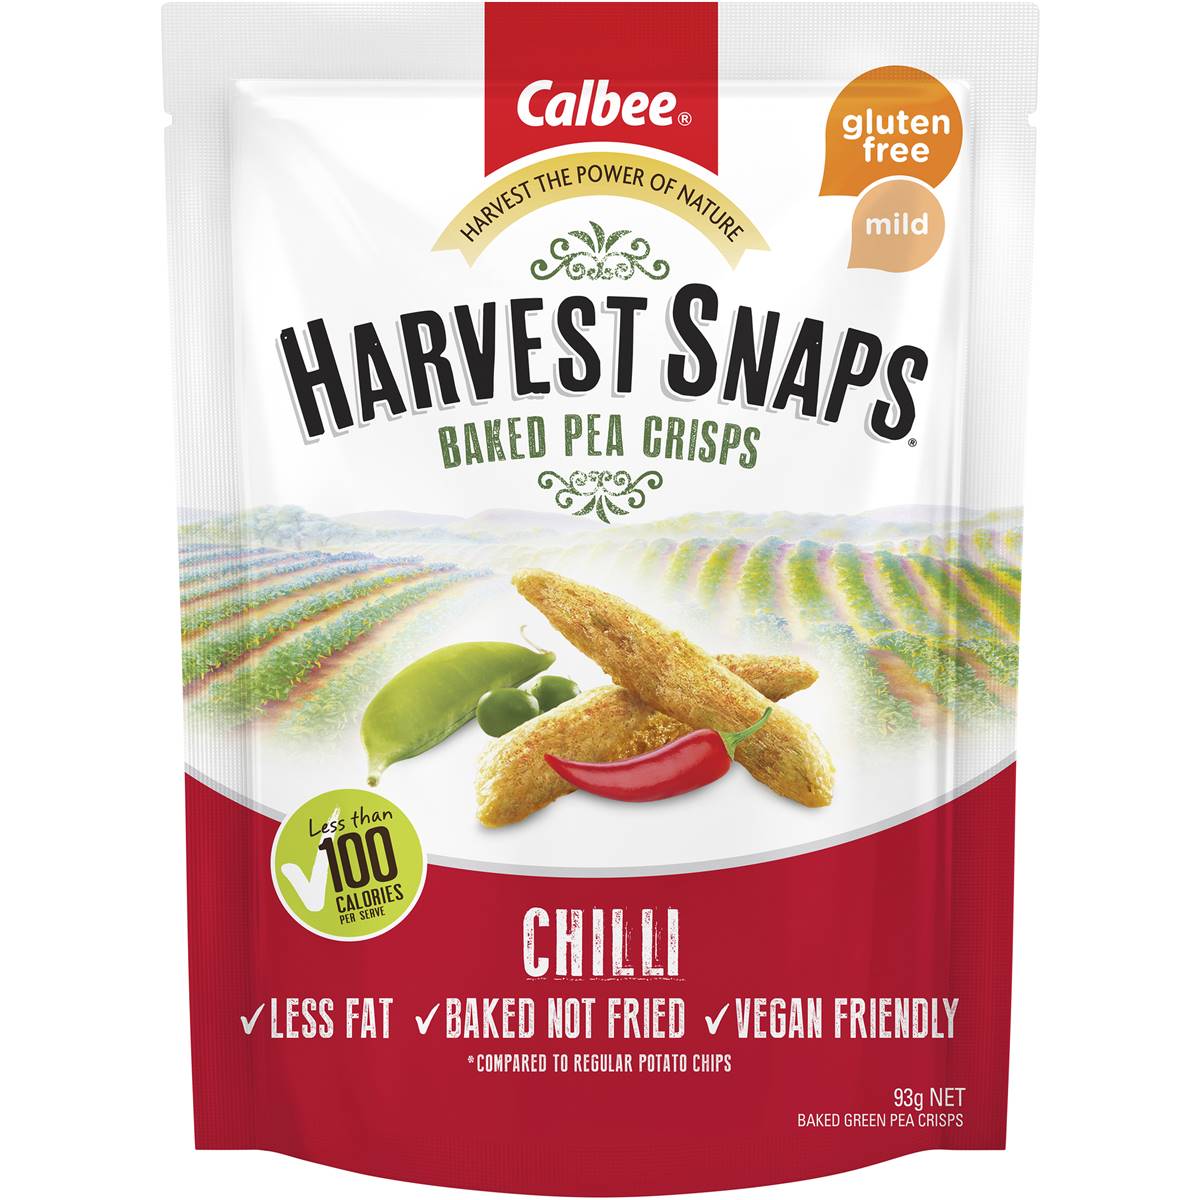 Calories in Calbee Harvest Snaps Pea Chilli Baked Crisps